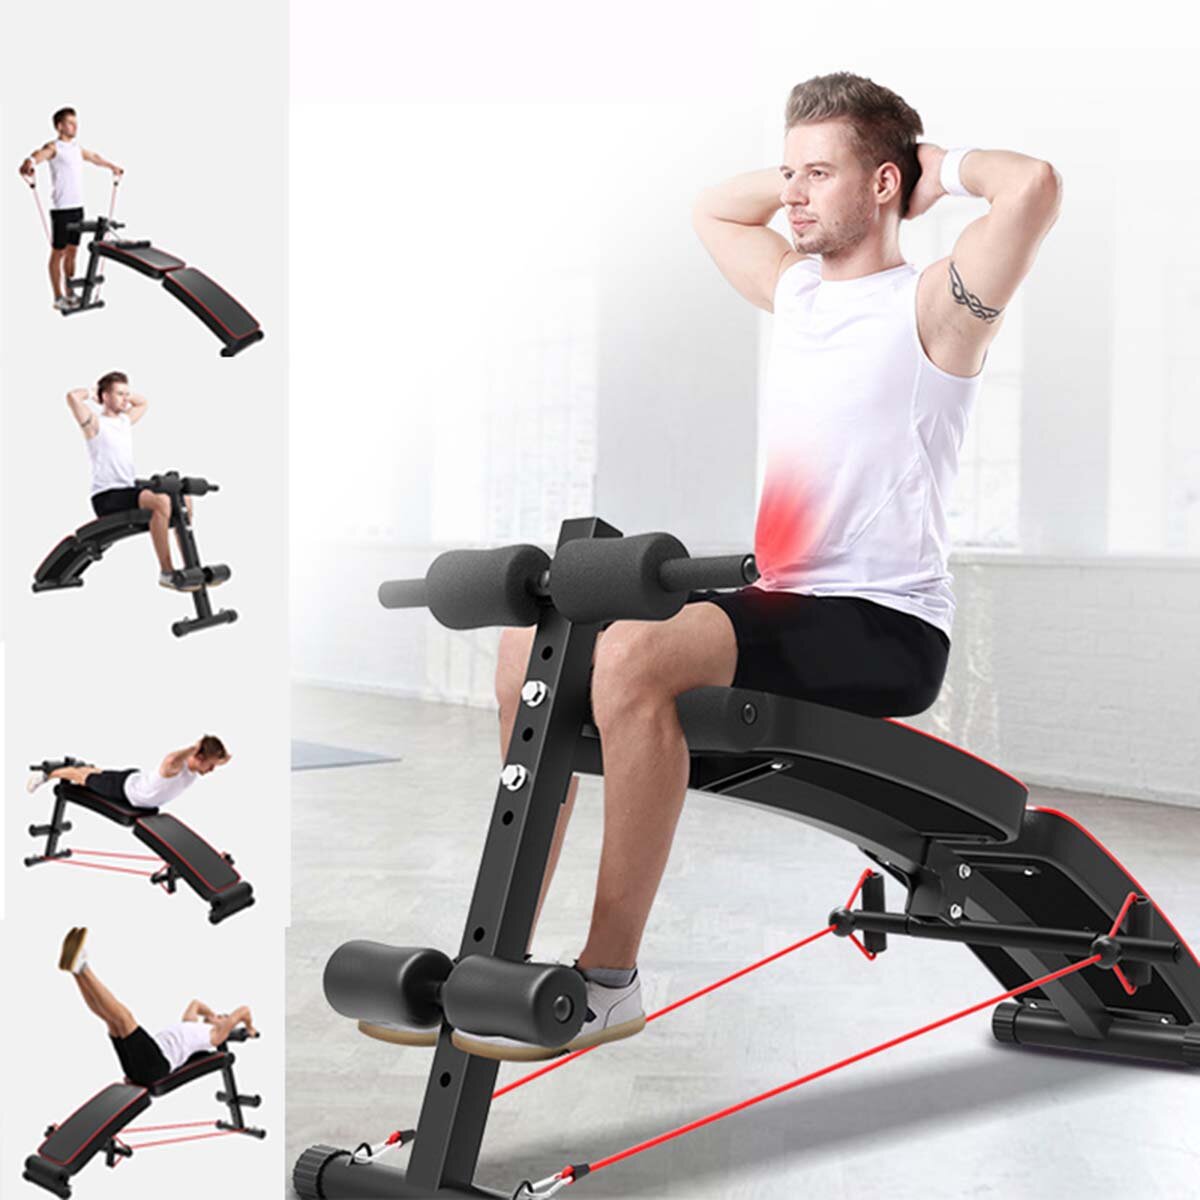 5 in 1 Multi-Functional Bench Folding Supine Abdominal Muscle Board For Full All-in-One Body Workout Adjustable Ab Sit u